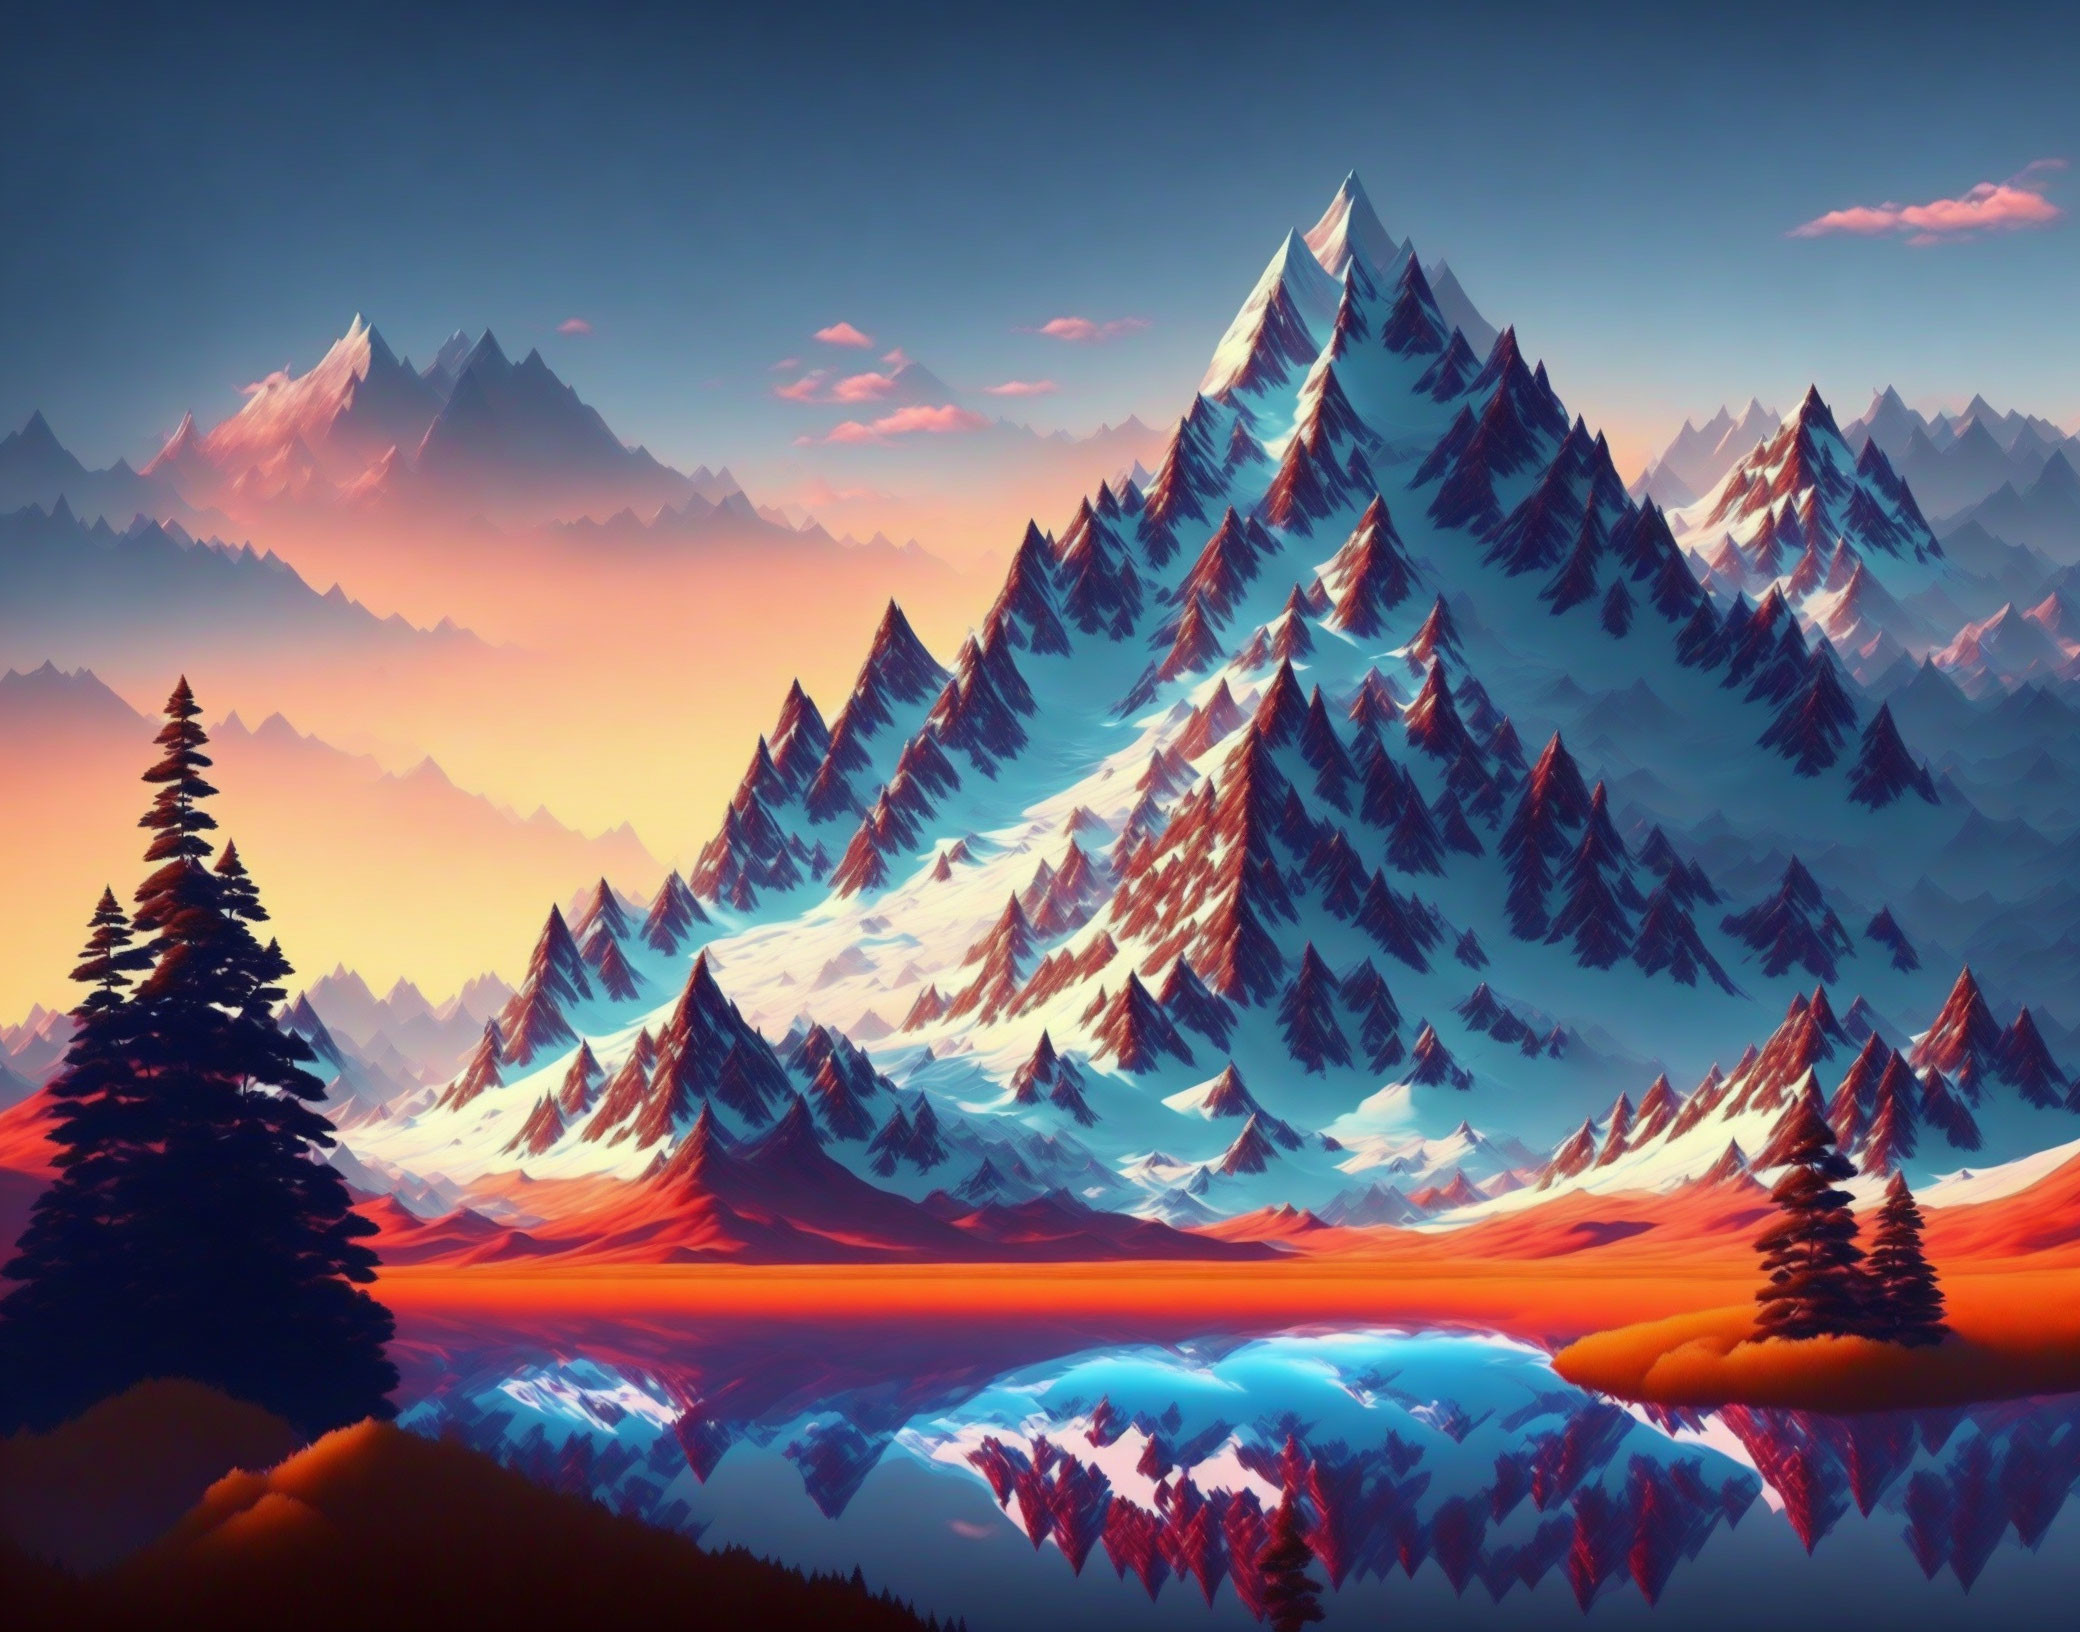 Vibrant surreal digital art: Exaggerated mountain peaks and colorful body in misty sky